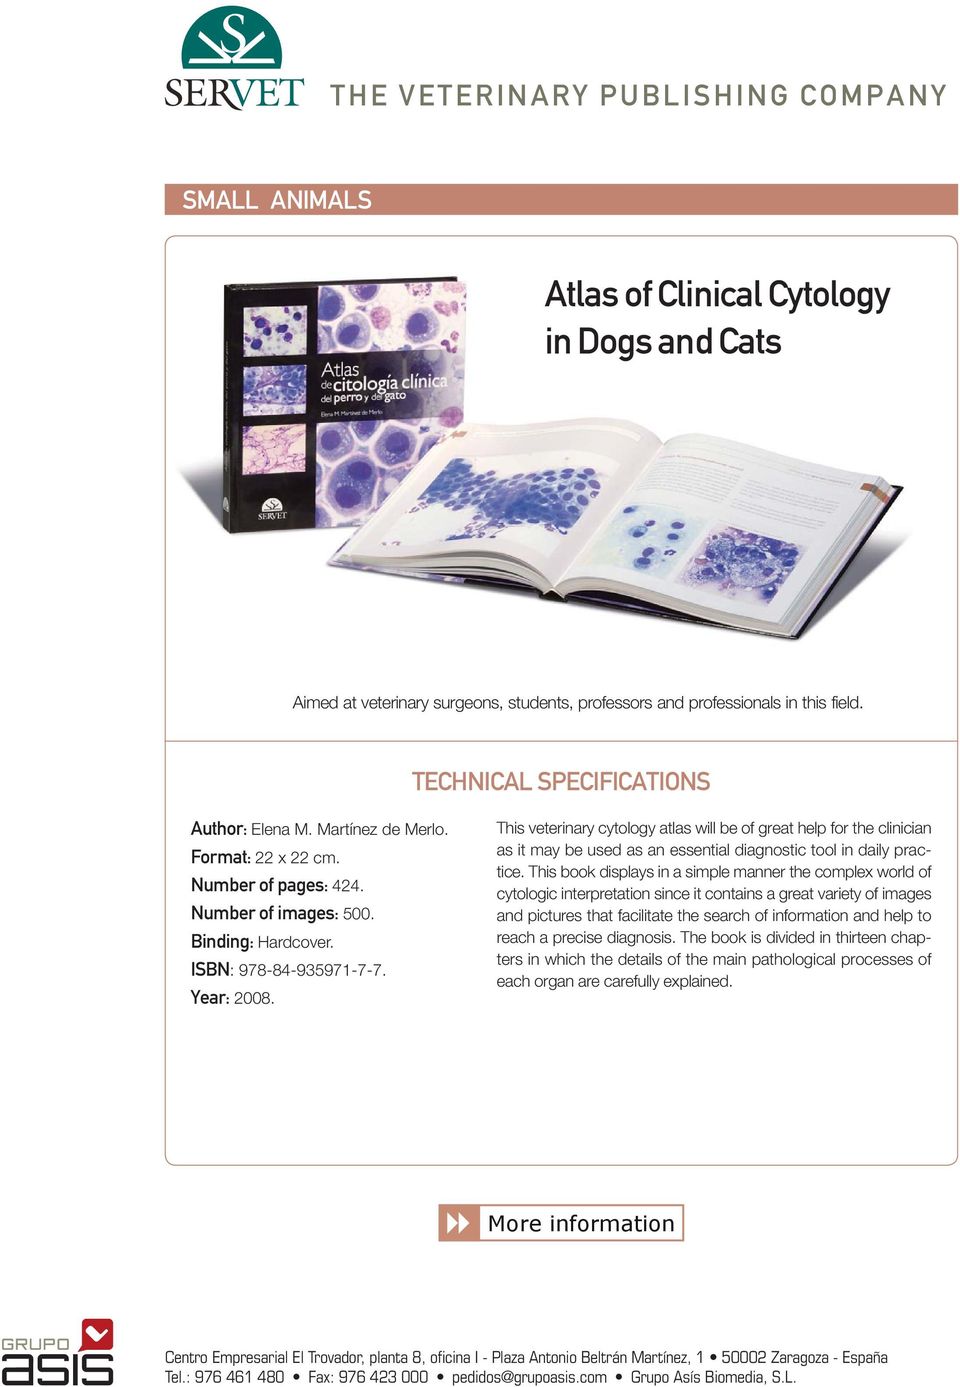 This veterinary cytology atlas will be of great help for the clinician as it may be used as an essential diagnostic tool in daily practice.